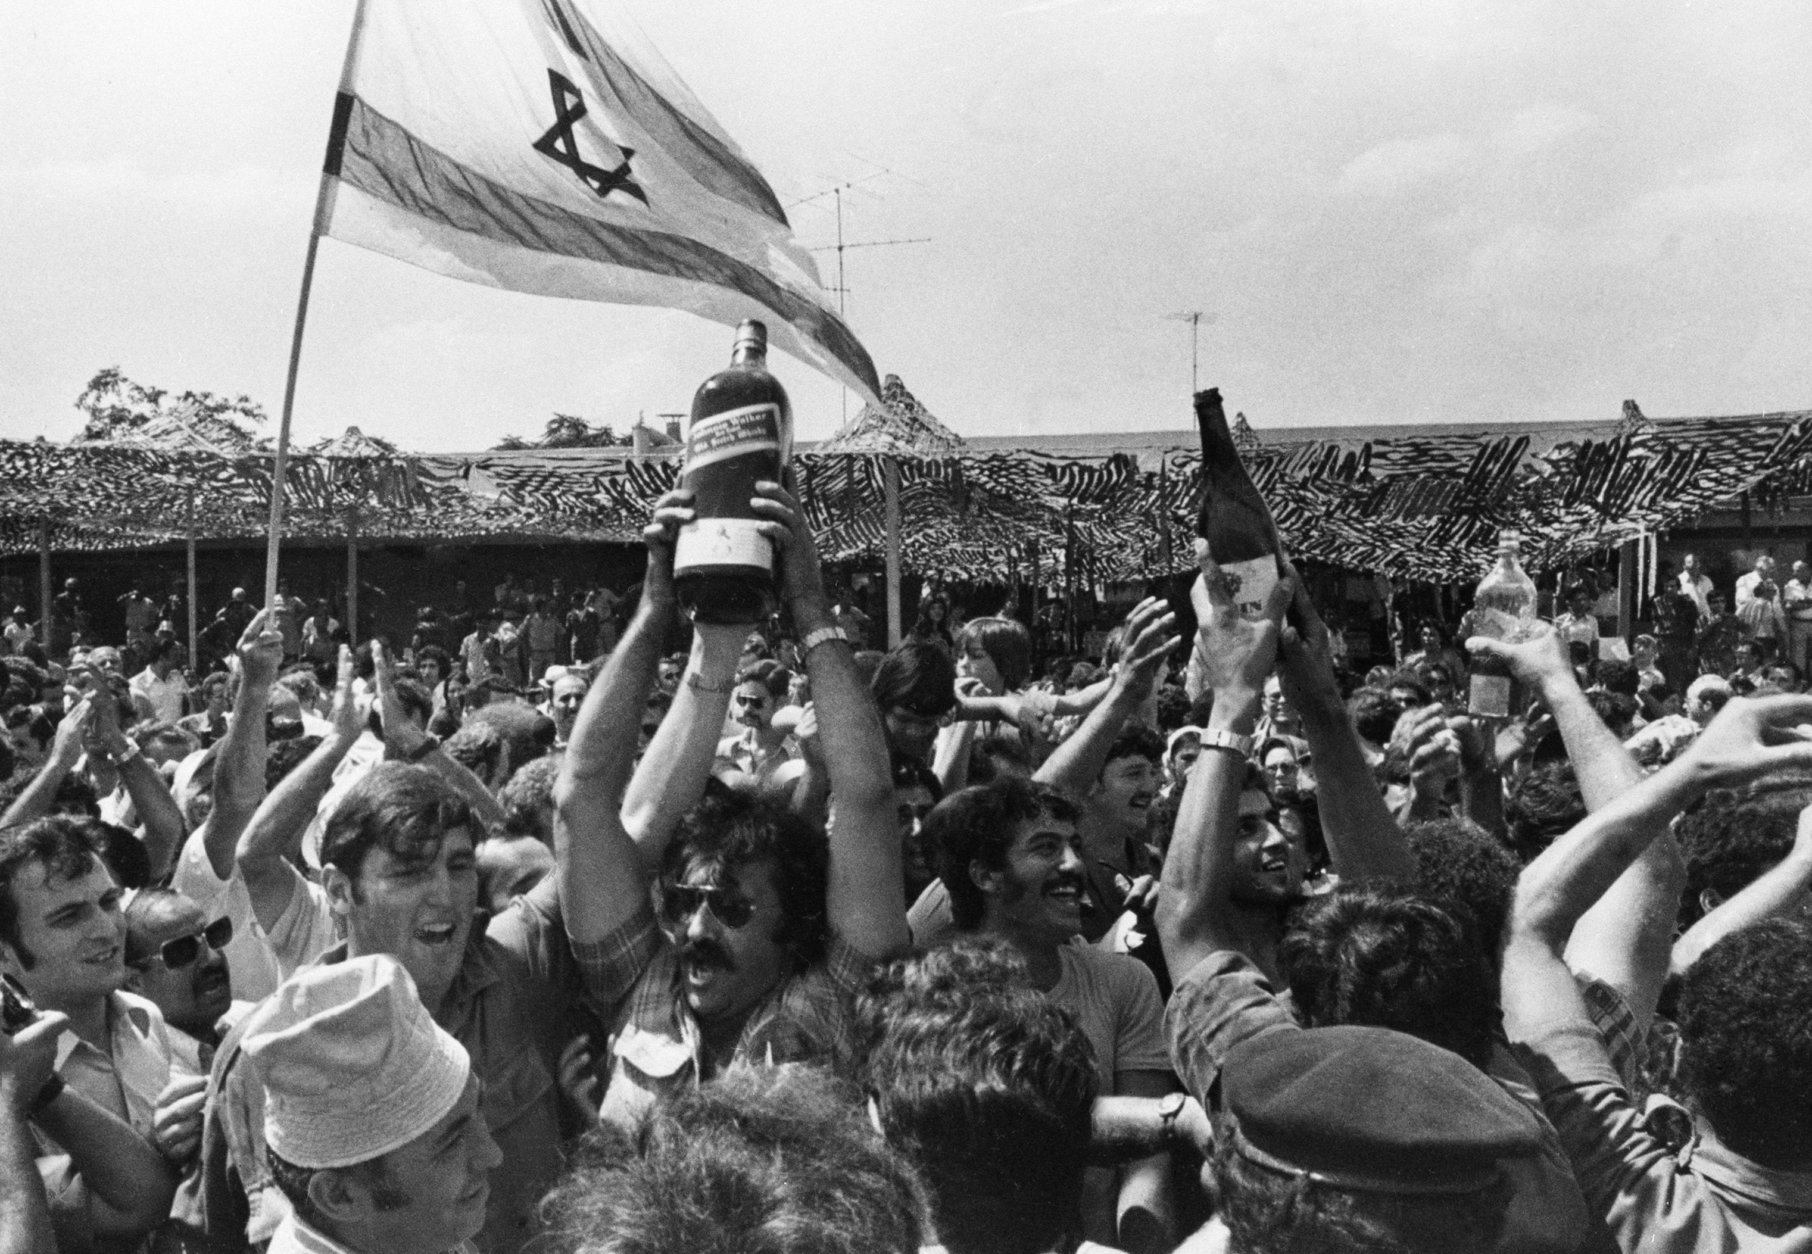 Some of the hundreds of relatives and well-wishers who came to Ben-Gurion Airport near Tel Aviv, July 4, 1976 for return of hijacked Air France passengers rescued in night raid Uganda, where they were held for a week raise Israeli flag and bottles of drink in toast. (AP Photo/Shmuel Rachmani)